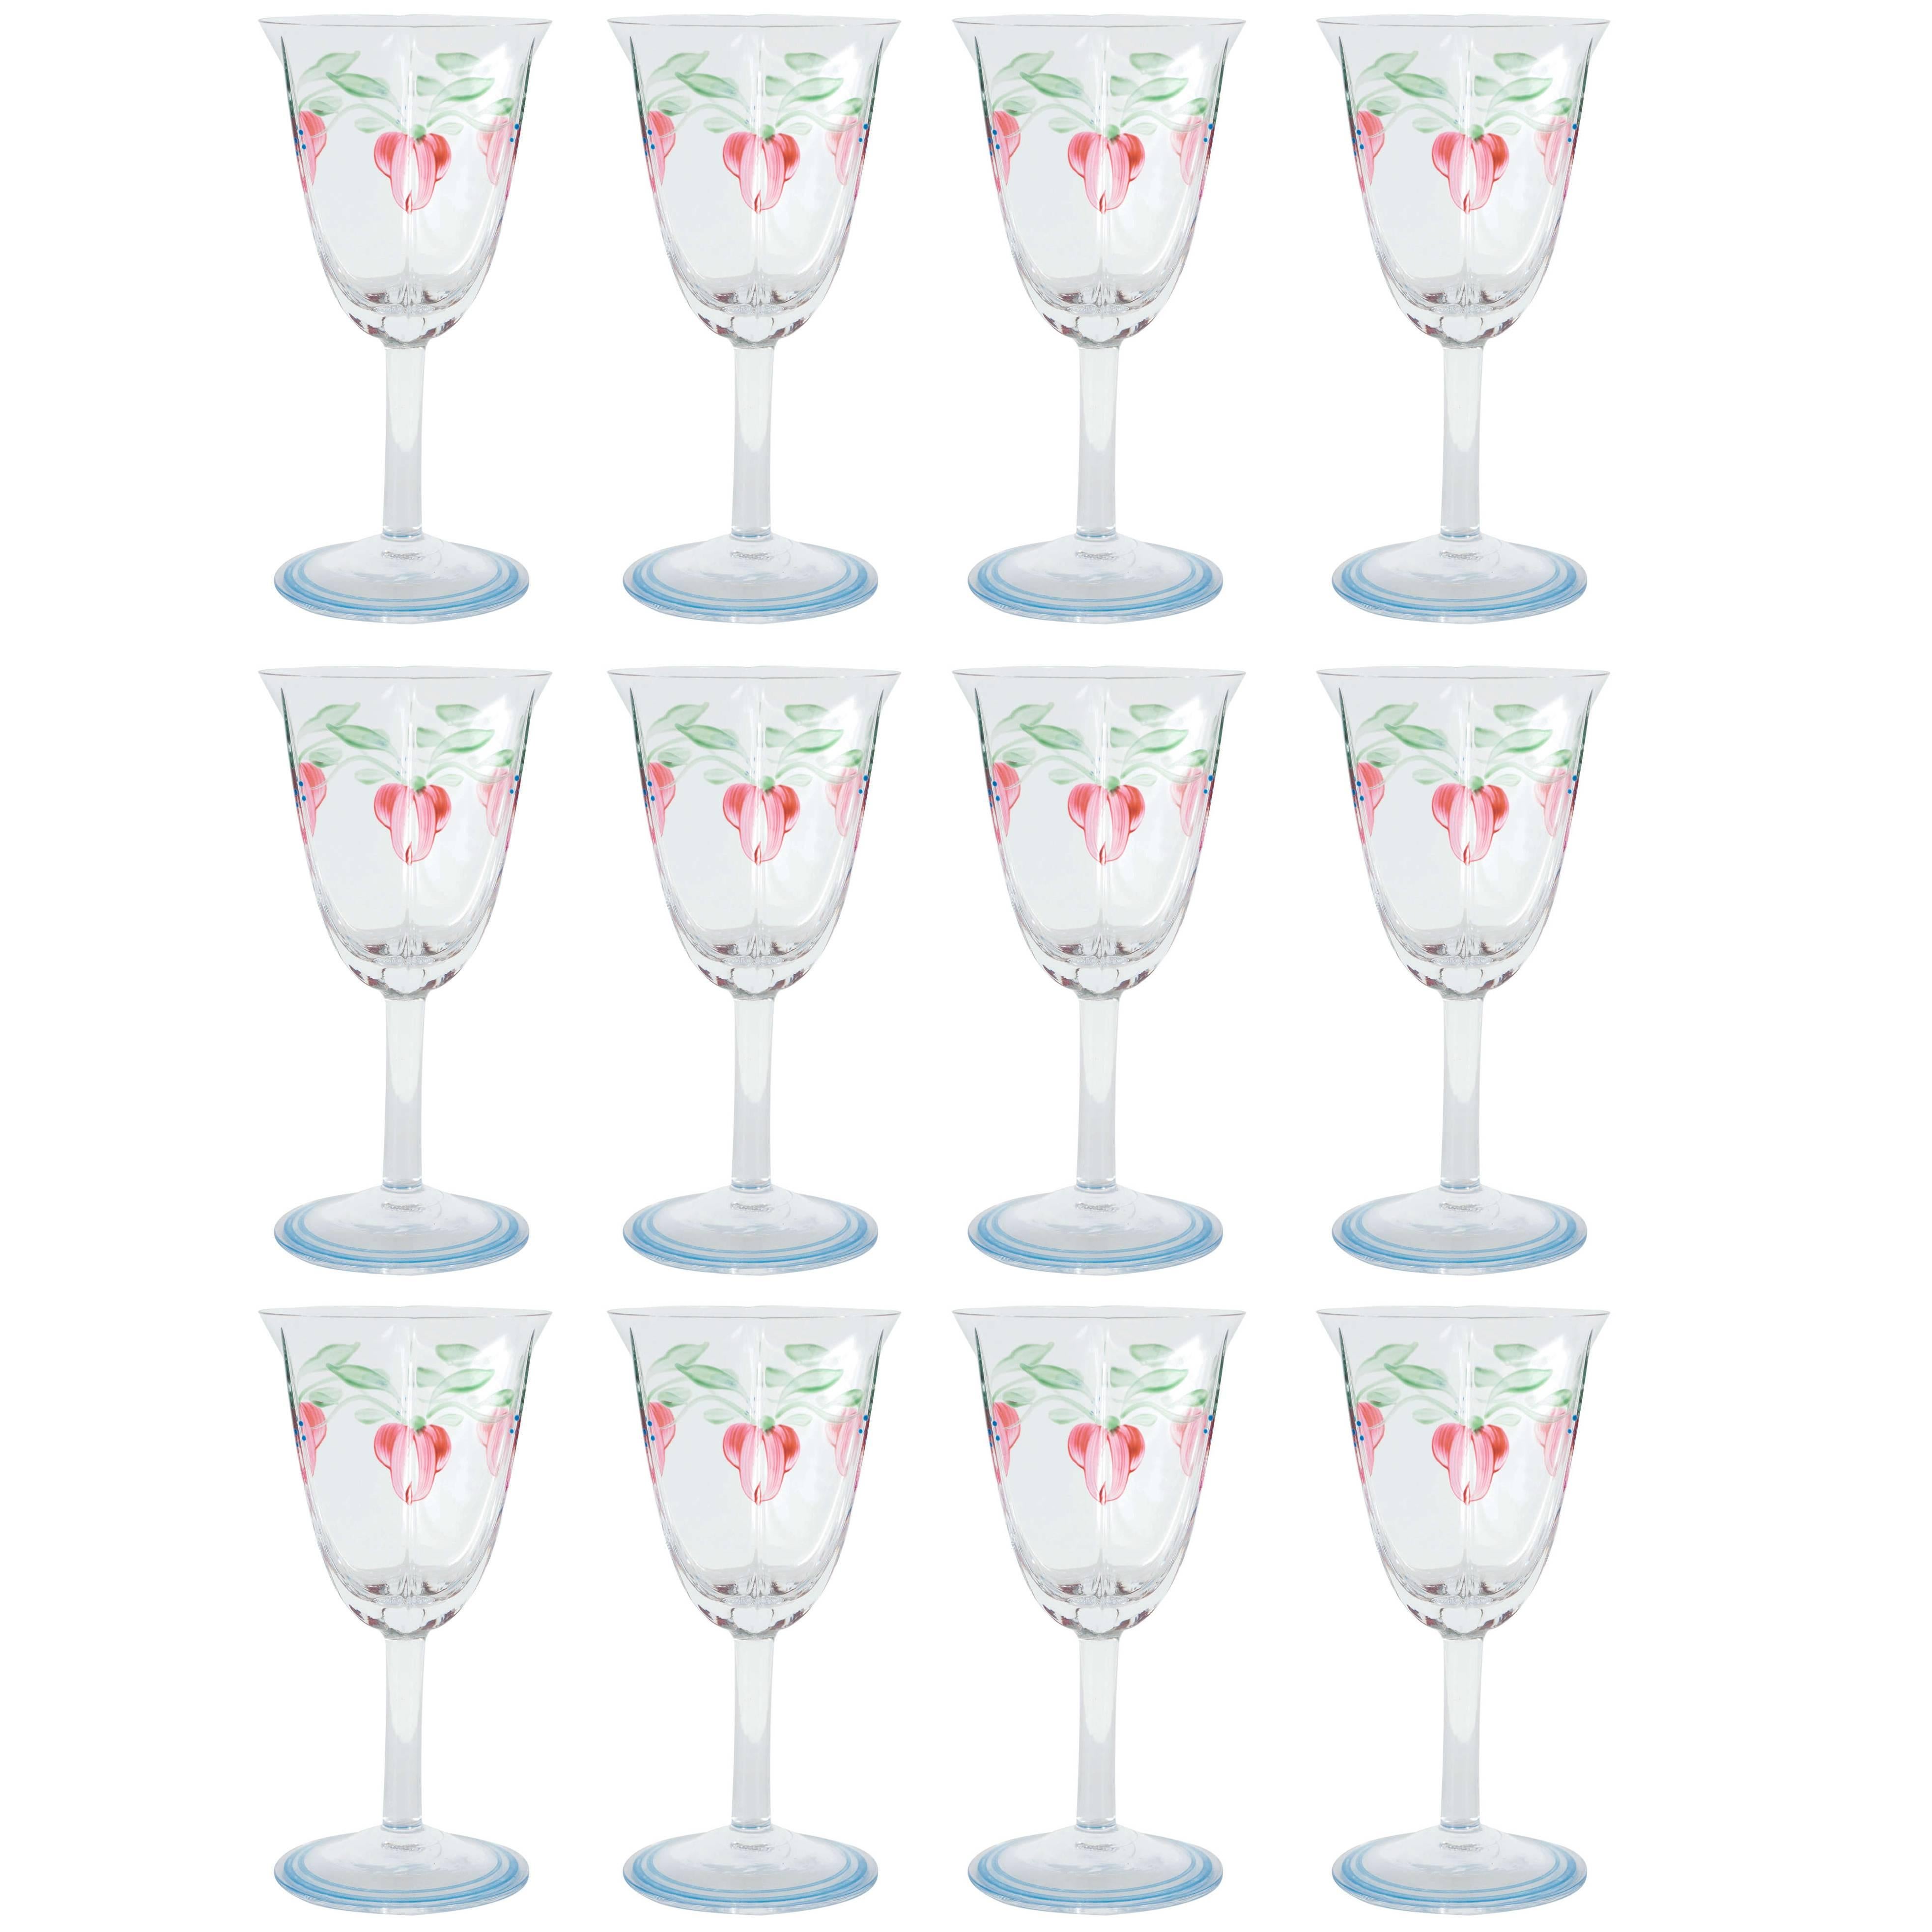 Set of Twelve Hand-Painted Glasses with Stylized Floral and Foliage Design